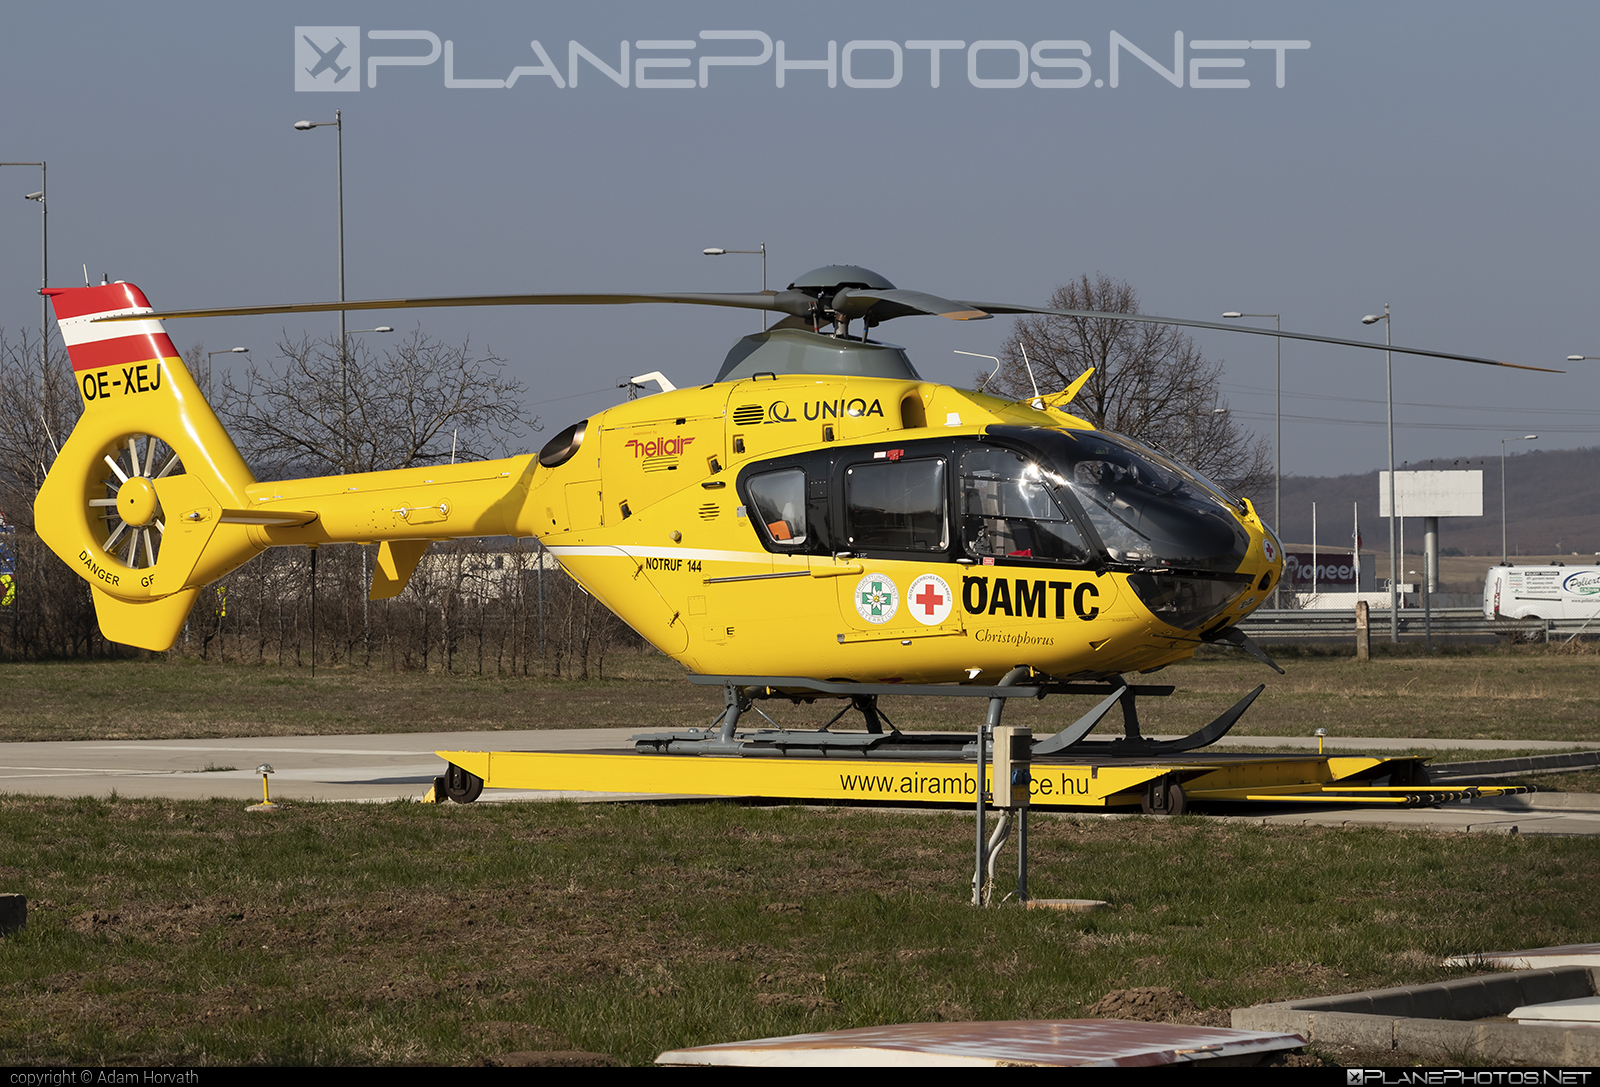 Eurocopter EC135 T2 - OE-XEJ operated by Helikopter Air Transport GmbH #ec135 #ec135t2 #eurocopter #heliair #helikopterairtransport #helikopterairtransportgmbh